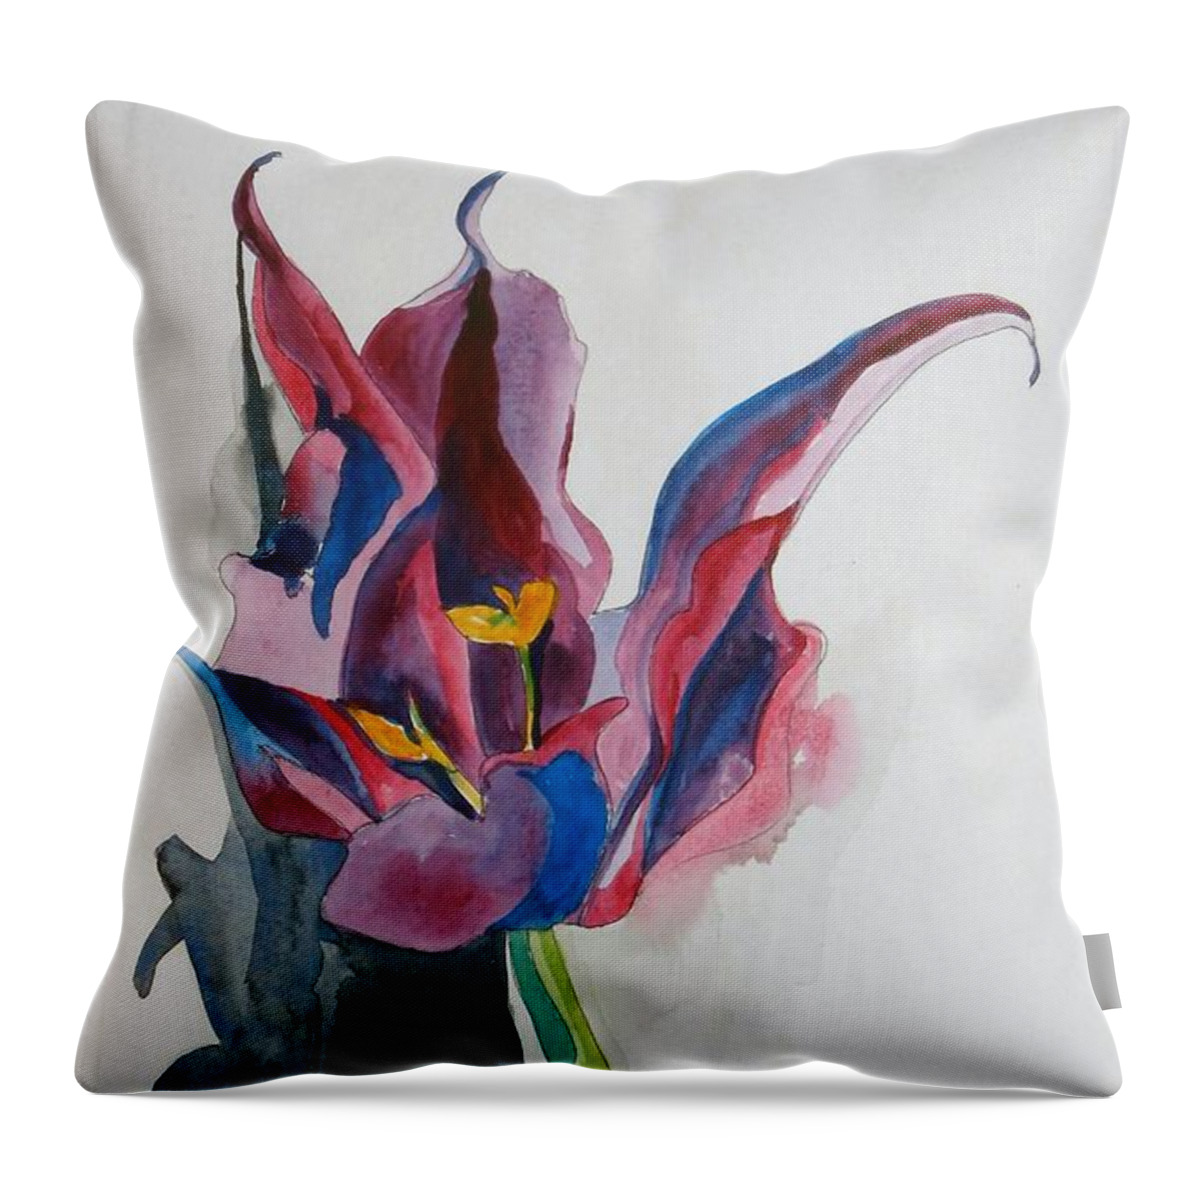 The Lonely Tulip Throw Pillow featuring the painting The Lonely Tulip by Esther Newman-Cohen